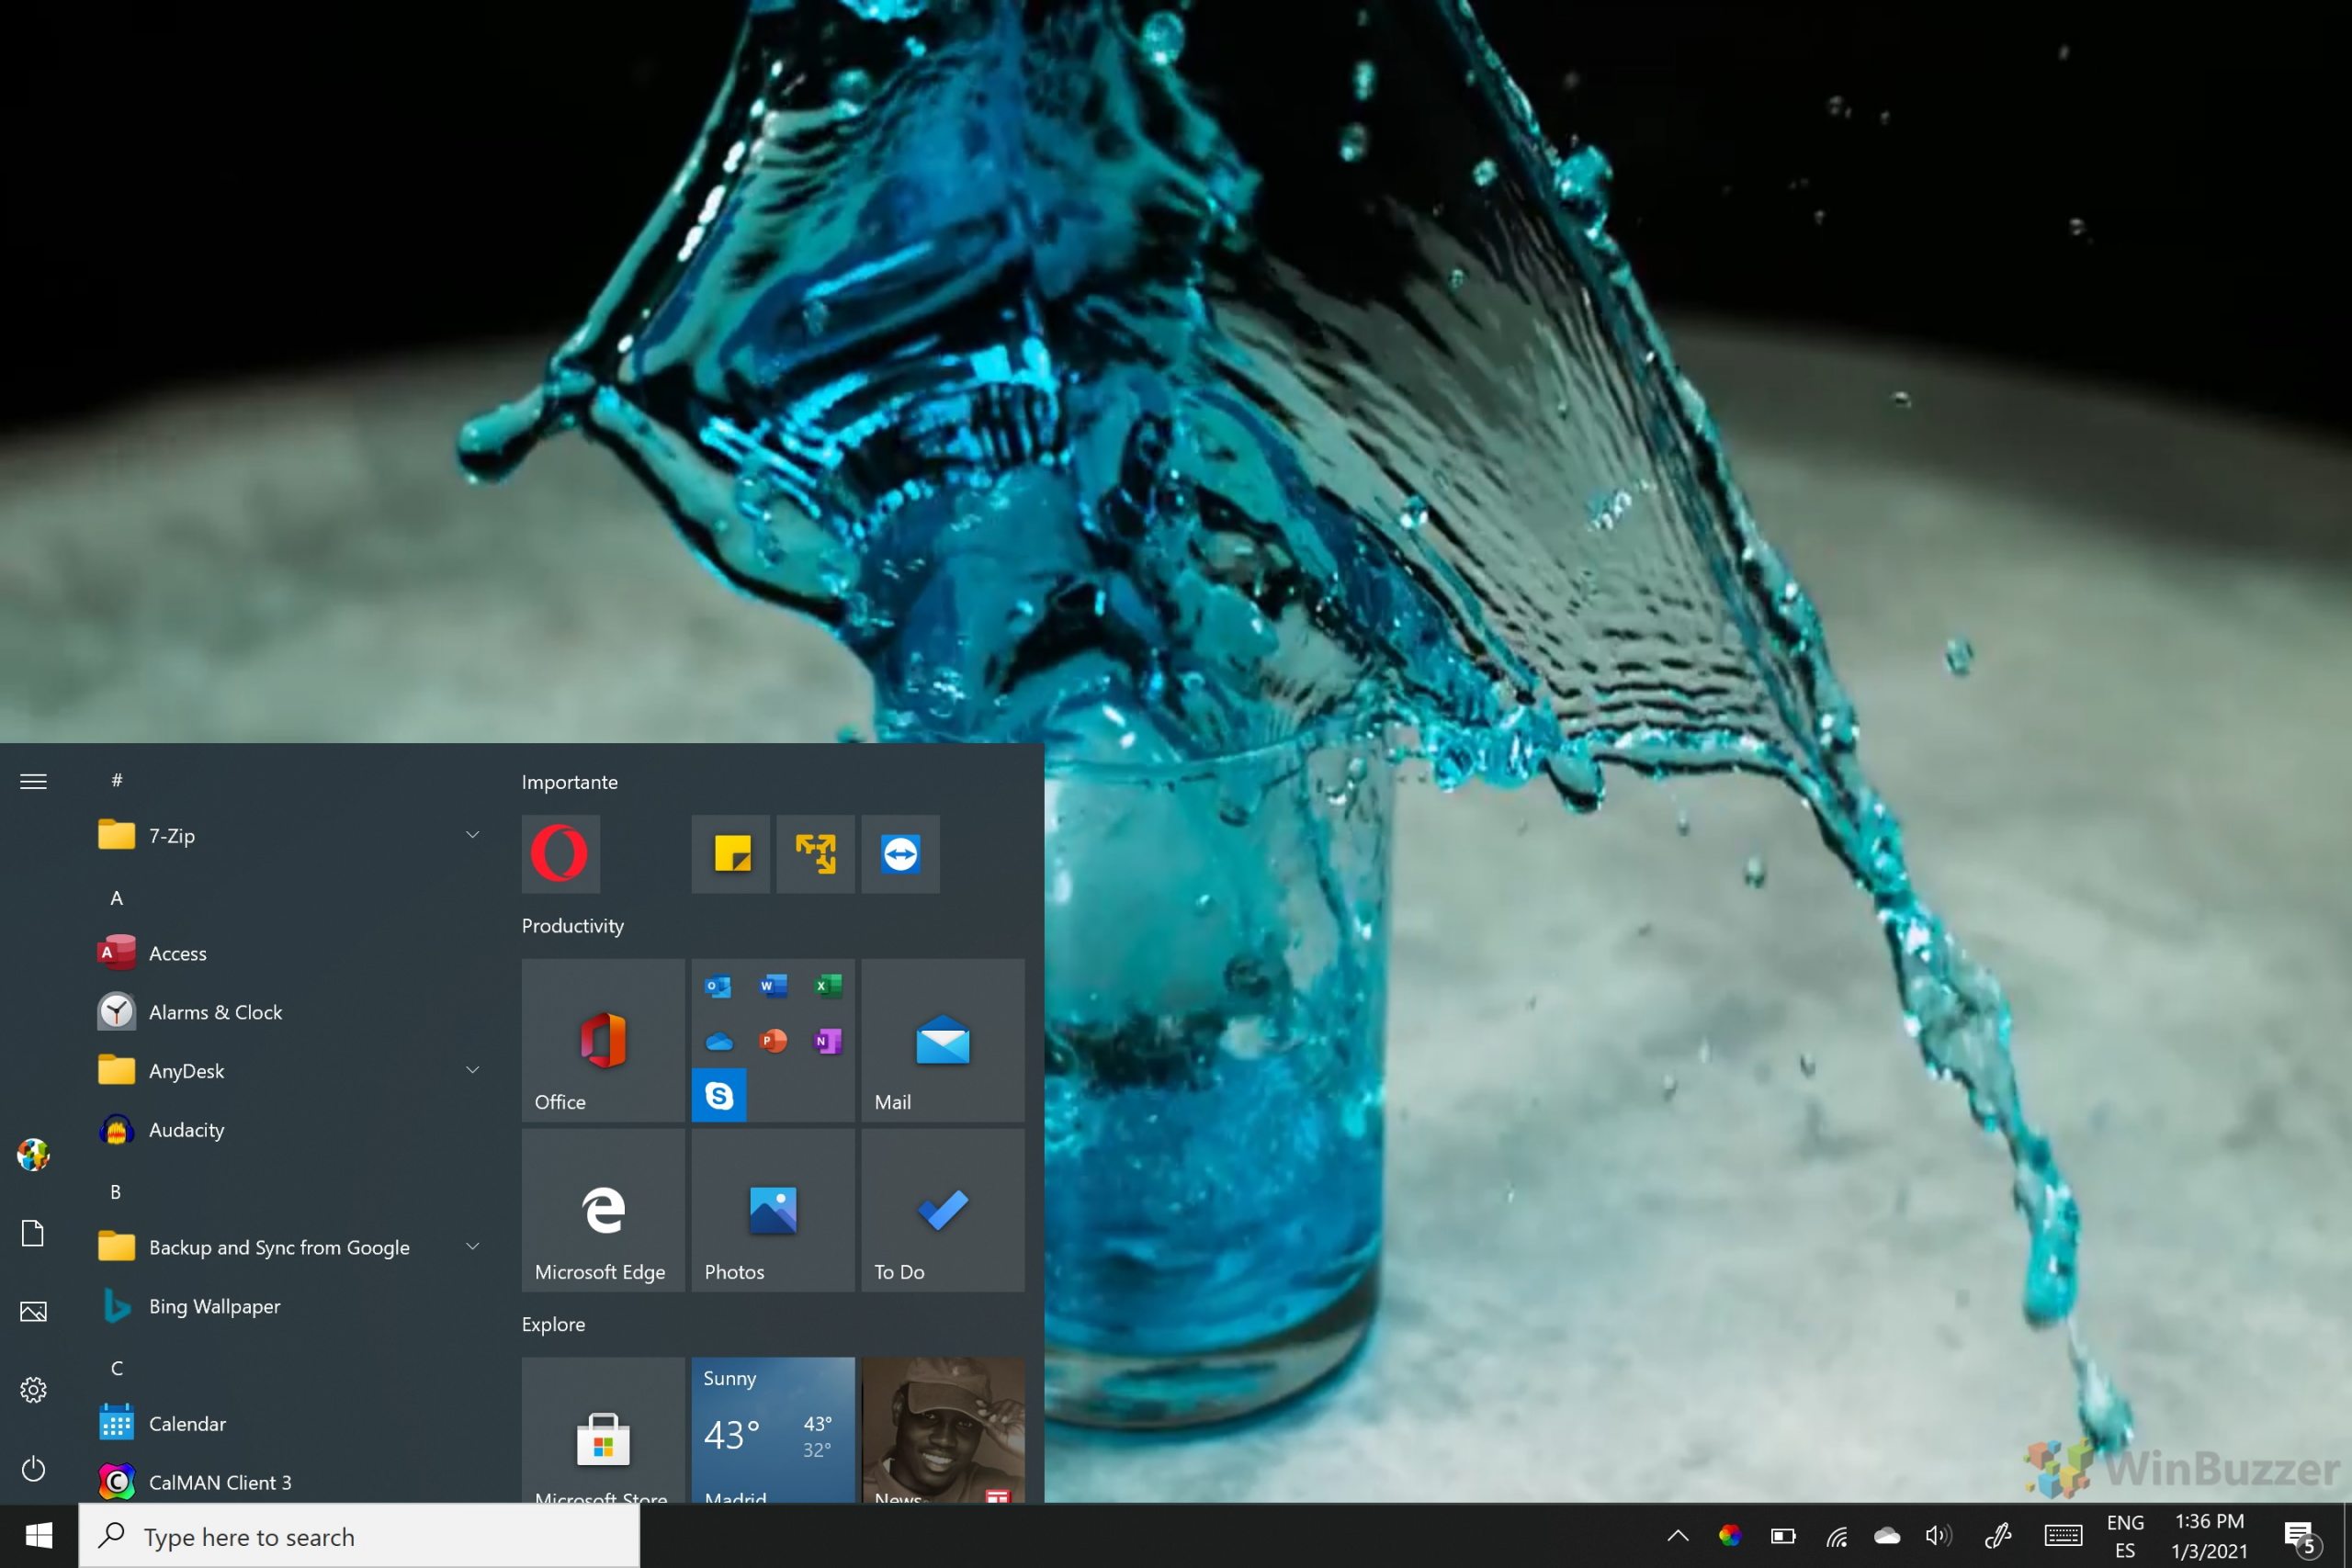 How To Set Live Wallpaper On Windows 10 - Detailed Instruction